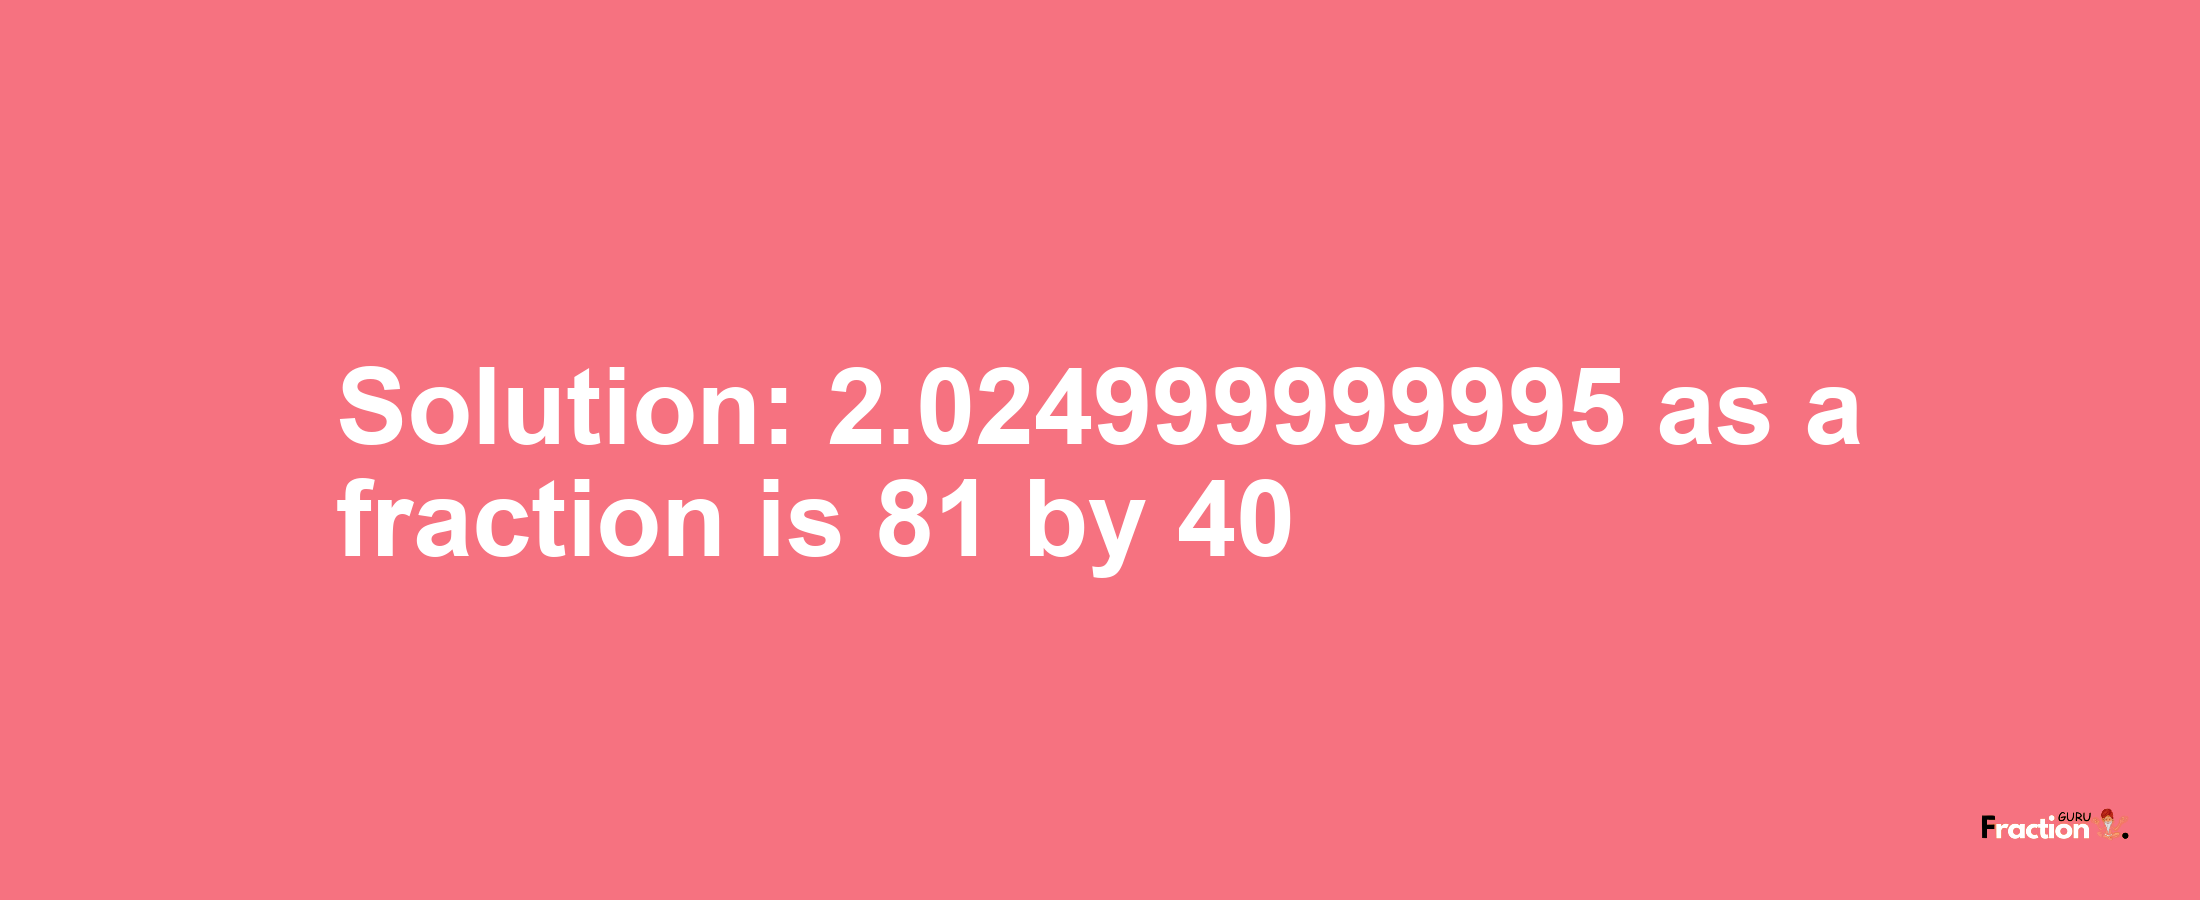 Solution:2.024999999995 as a fraction is 81/40